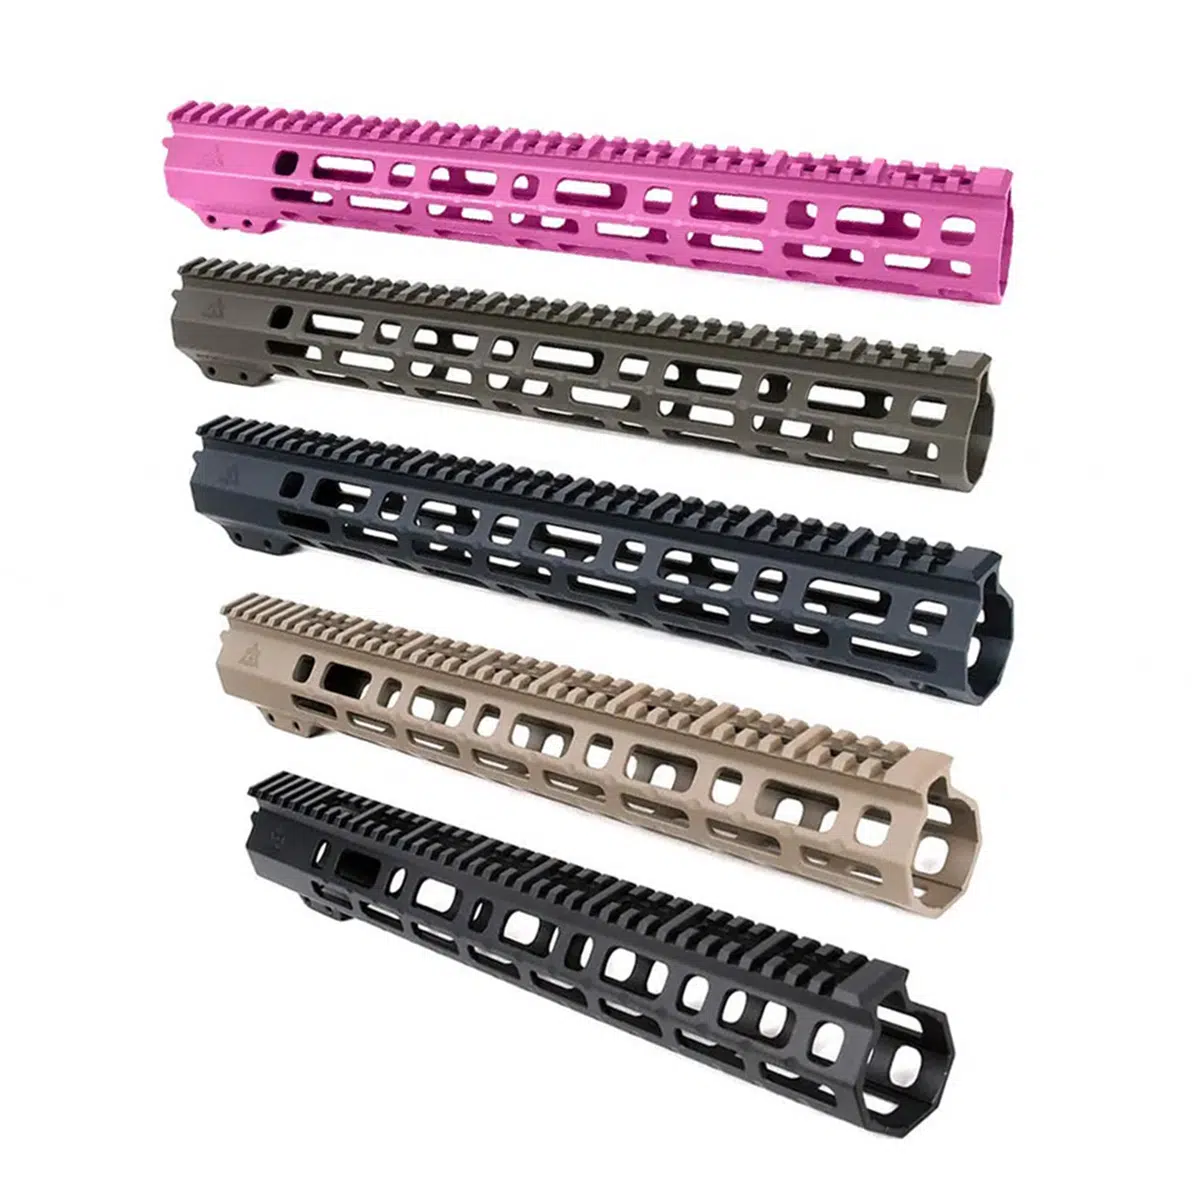 The AT3 SPEAR handguards are versatile, light, and available in some fun colors.